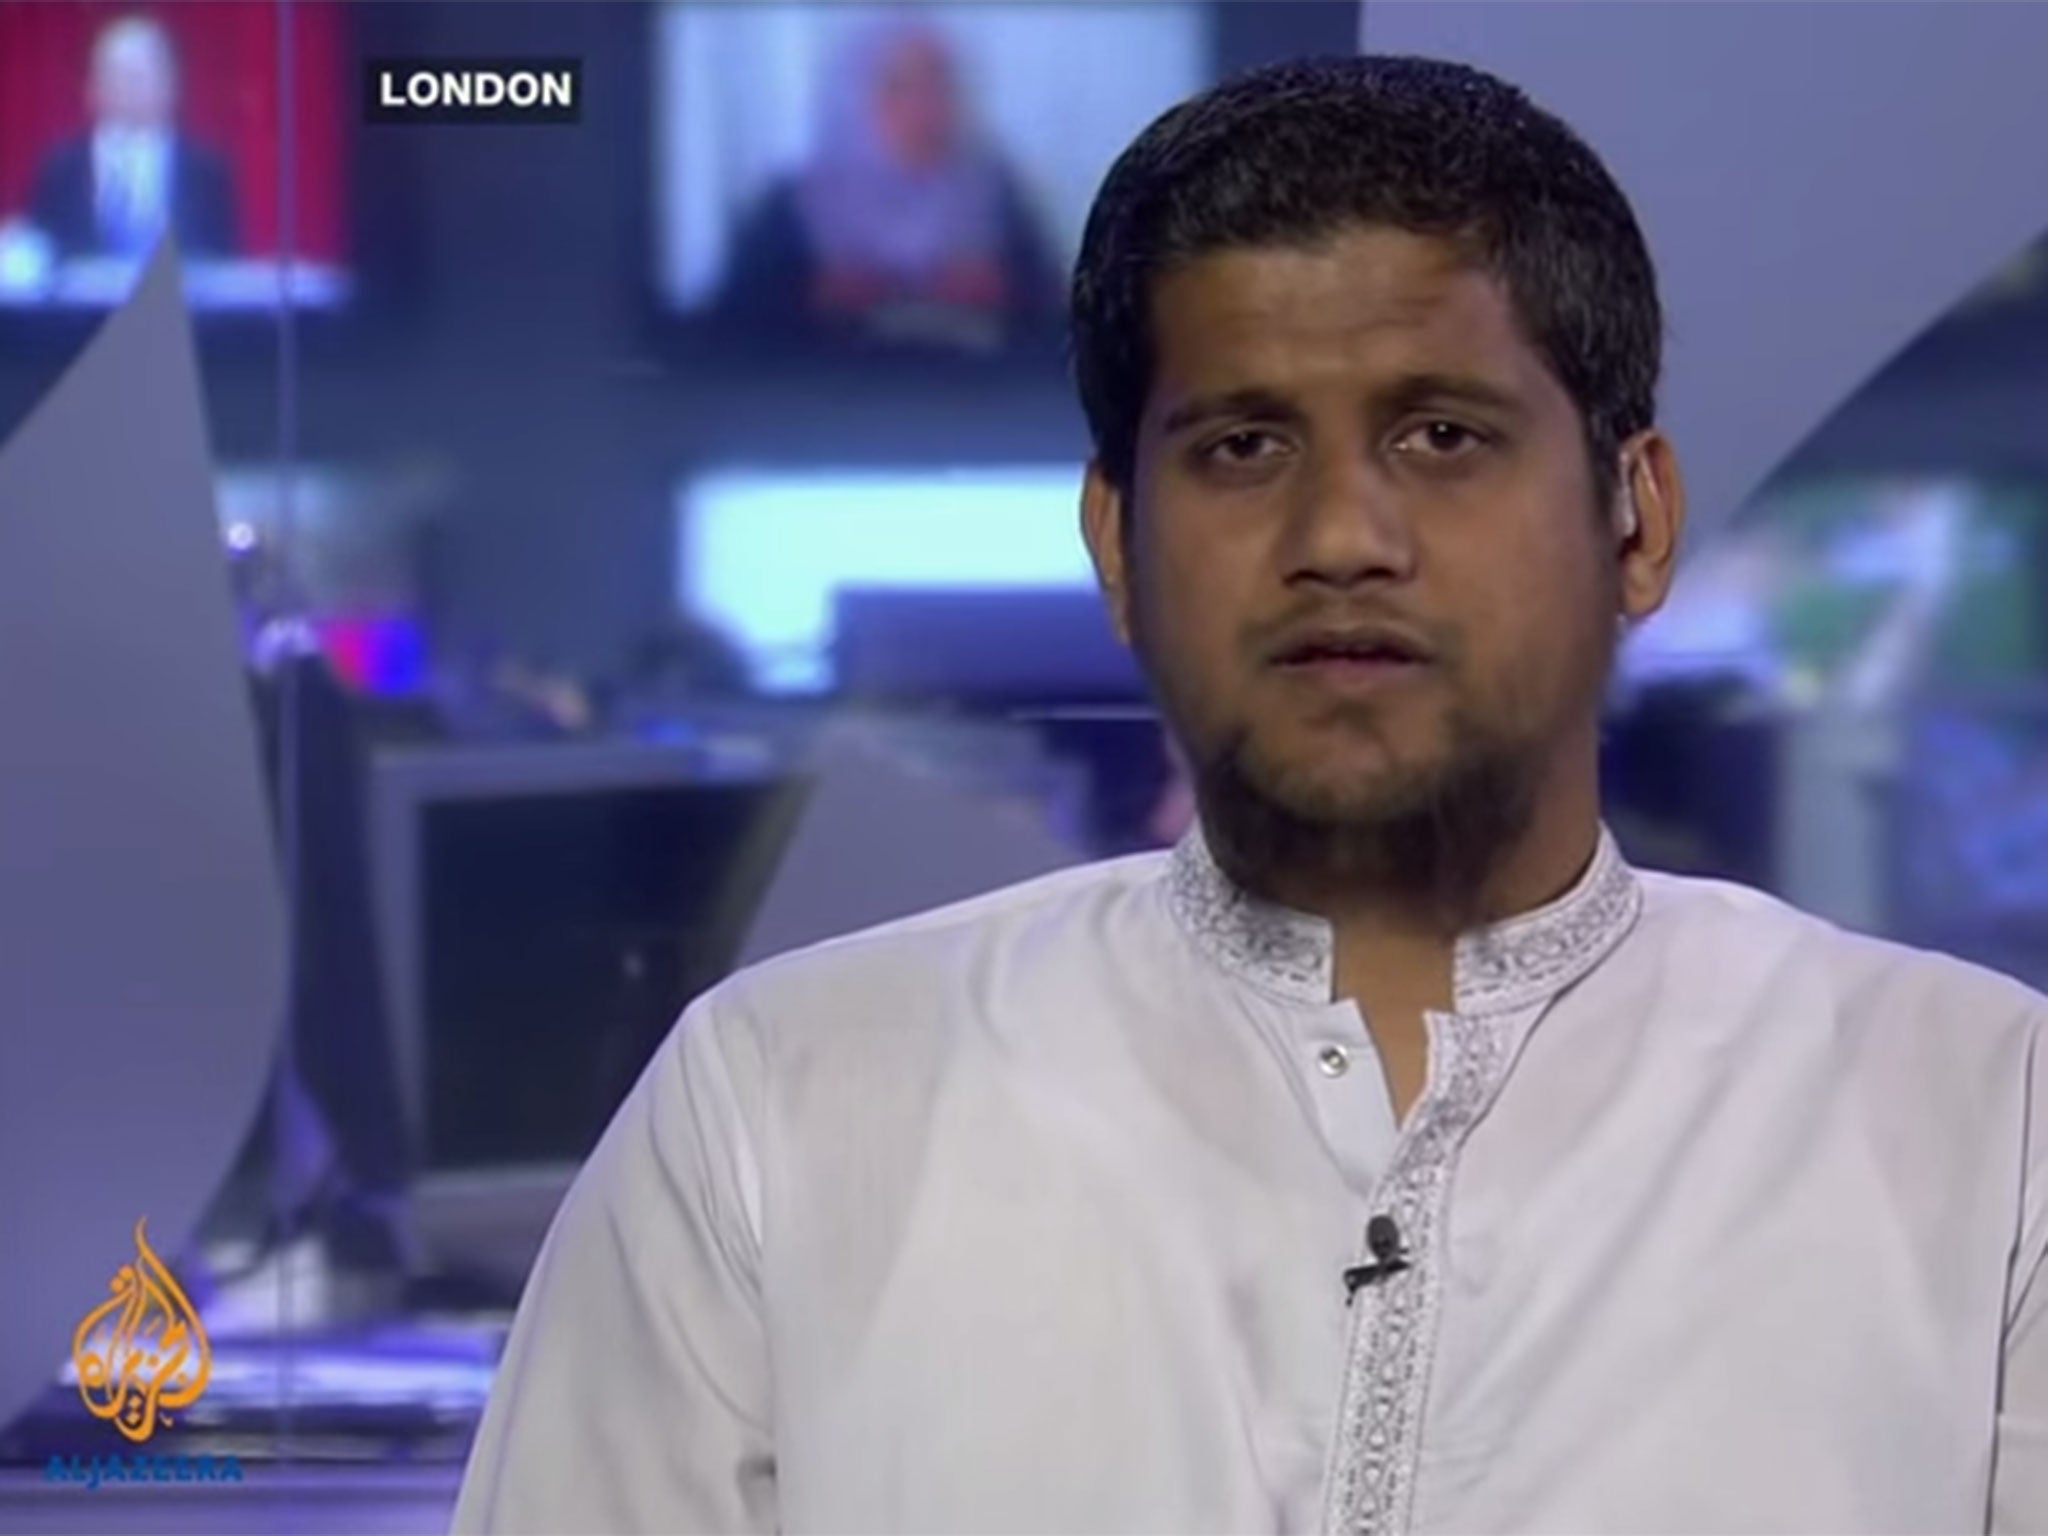 Rumaysah appeared as a talking head throughout a 20-minute programme for Aljazeera - at one point being identified simply as 'a British Muslim'